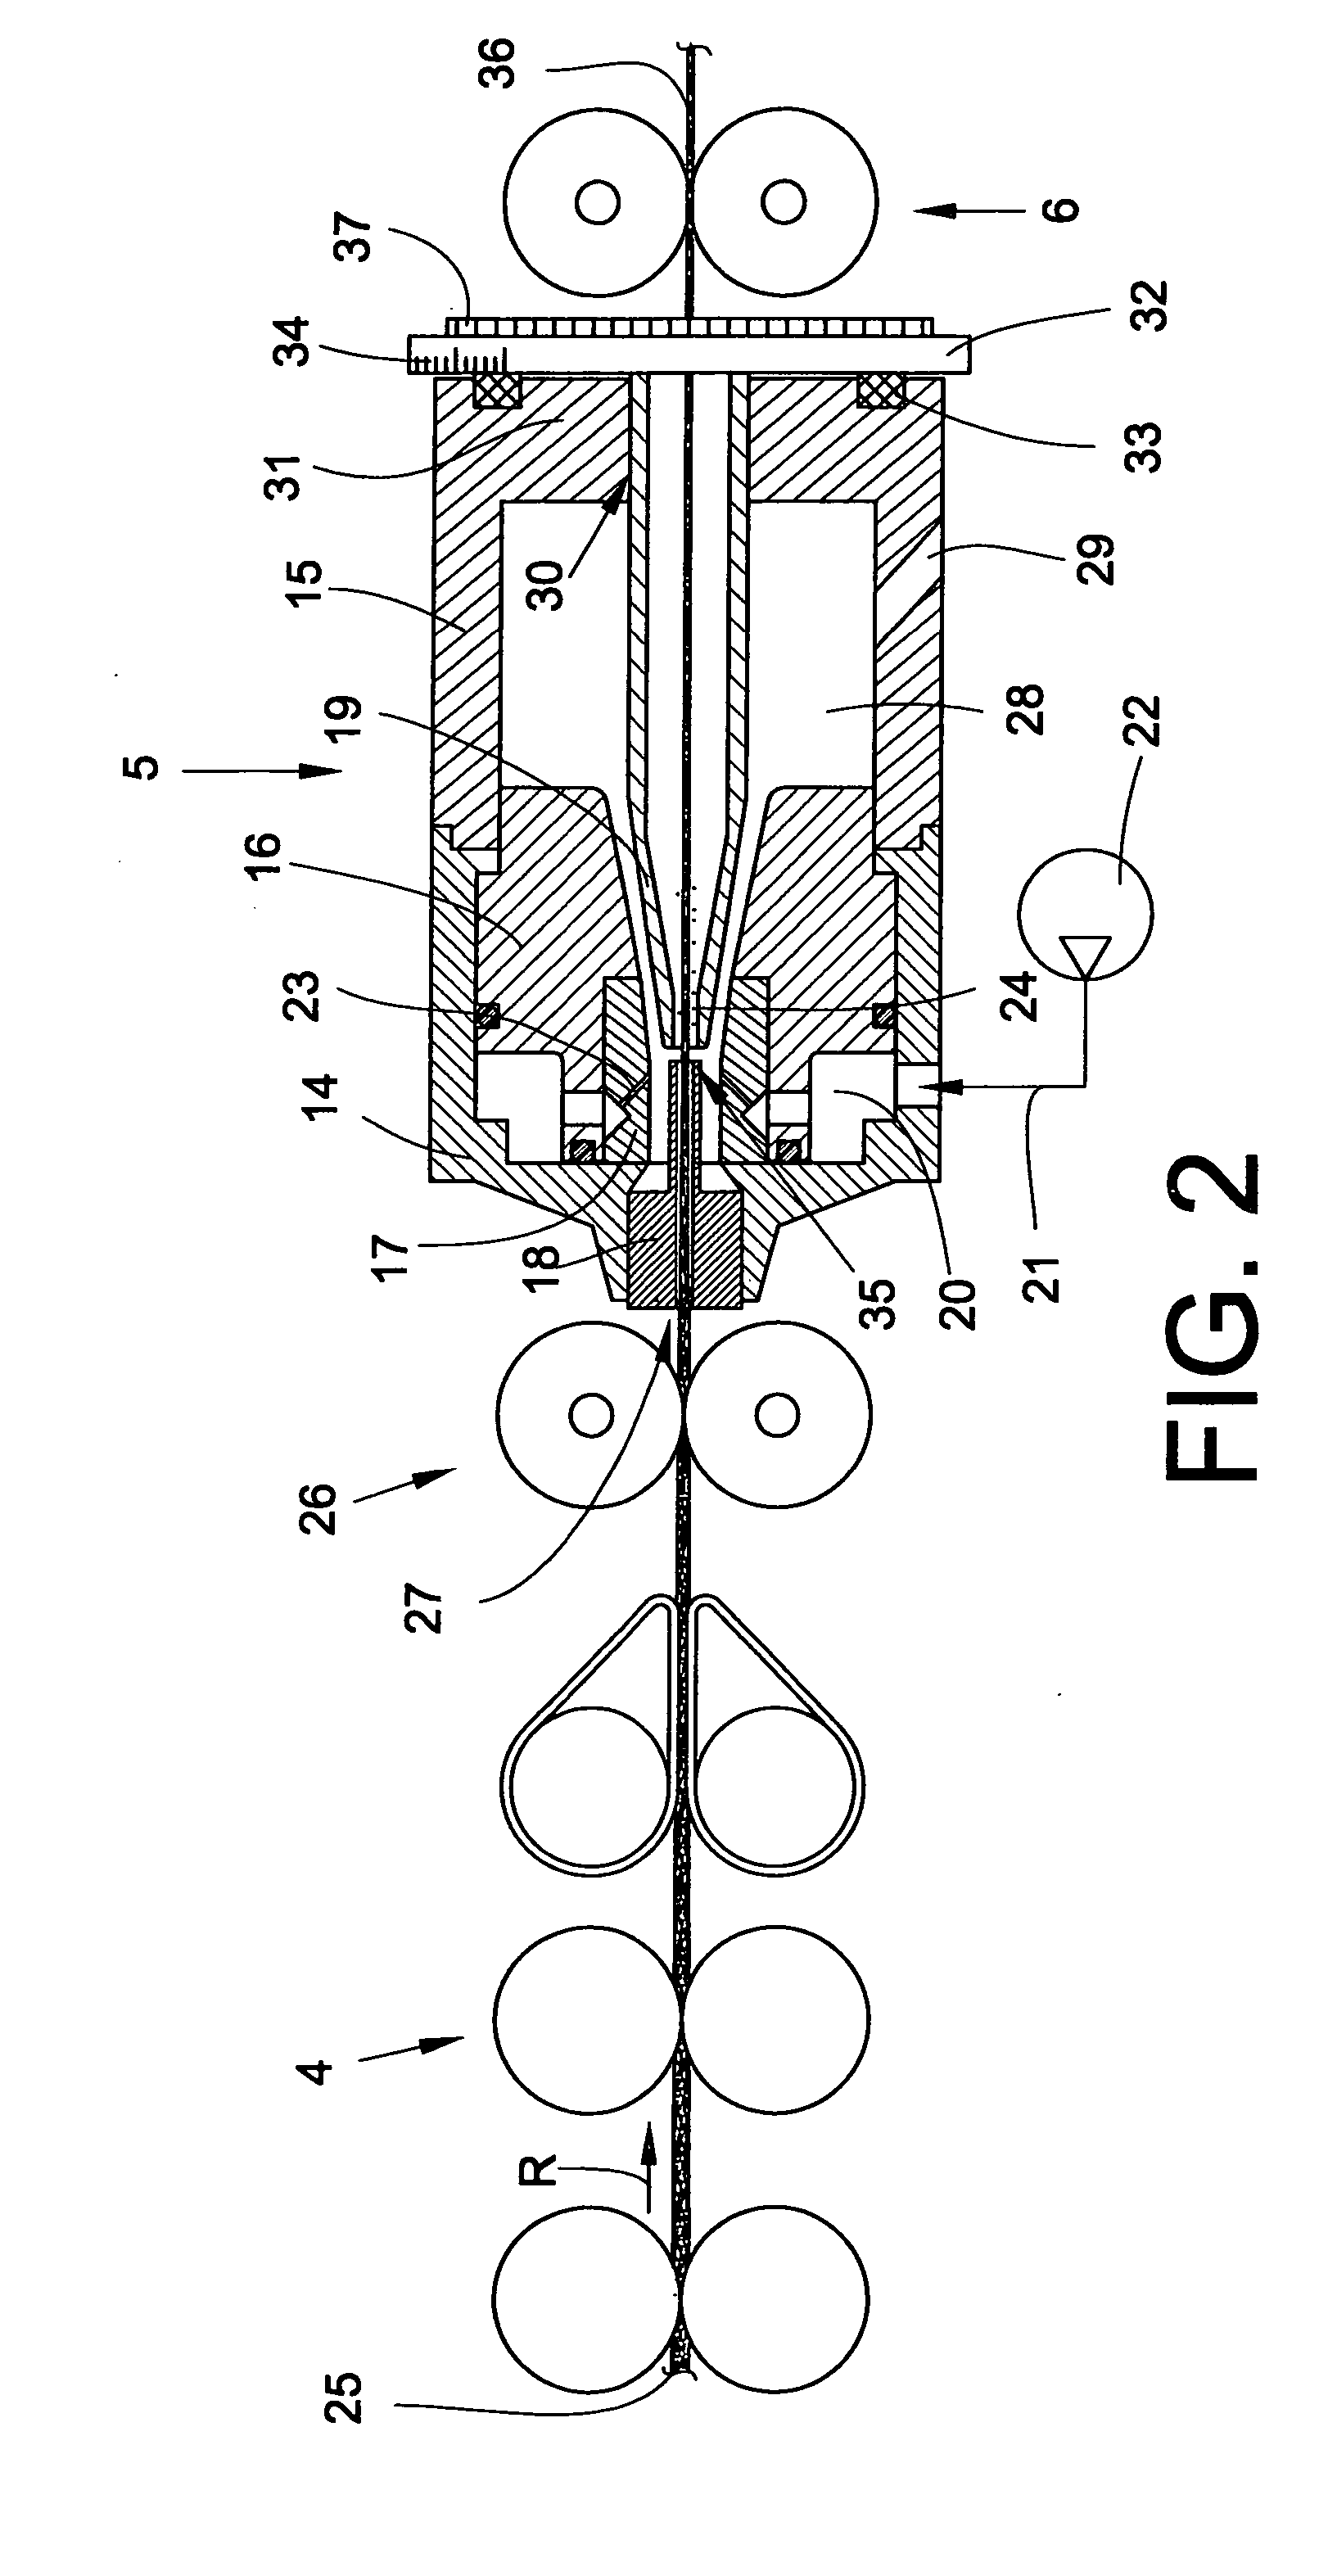 Spinning device for producing a yarn by means of a circulating air flow